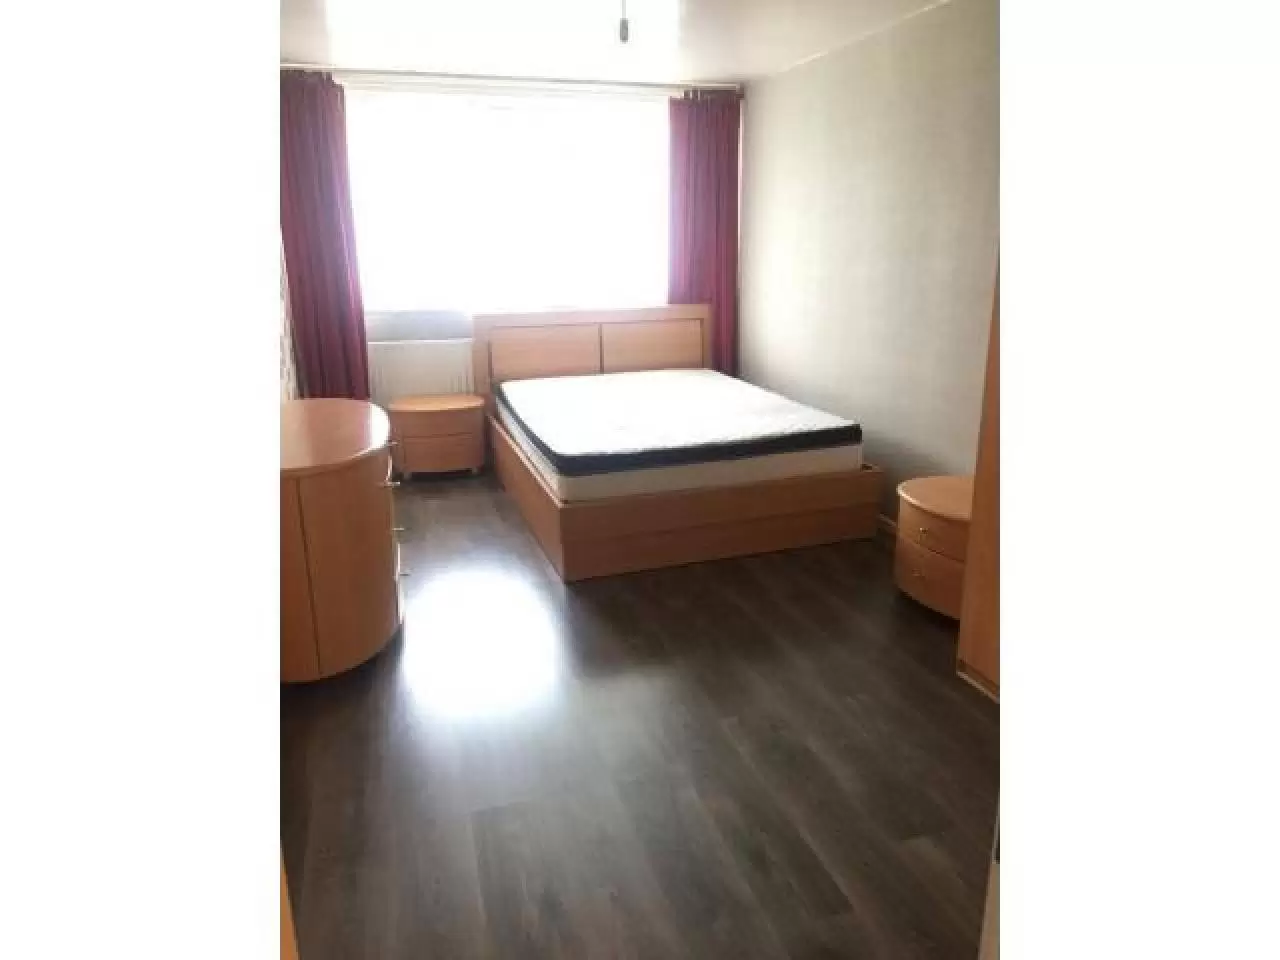 Double комната в аренду, £200/week, all bills included, Shadwell, London